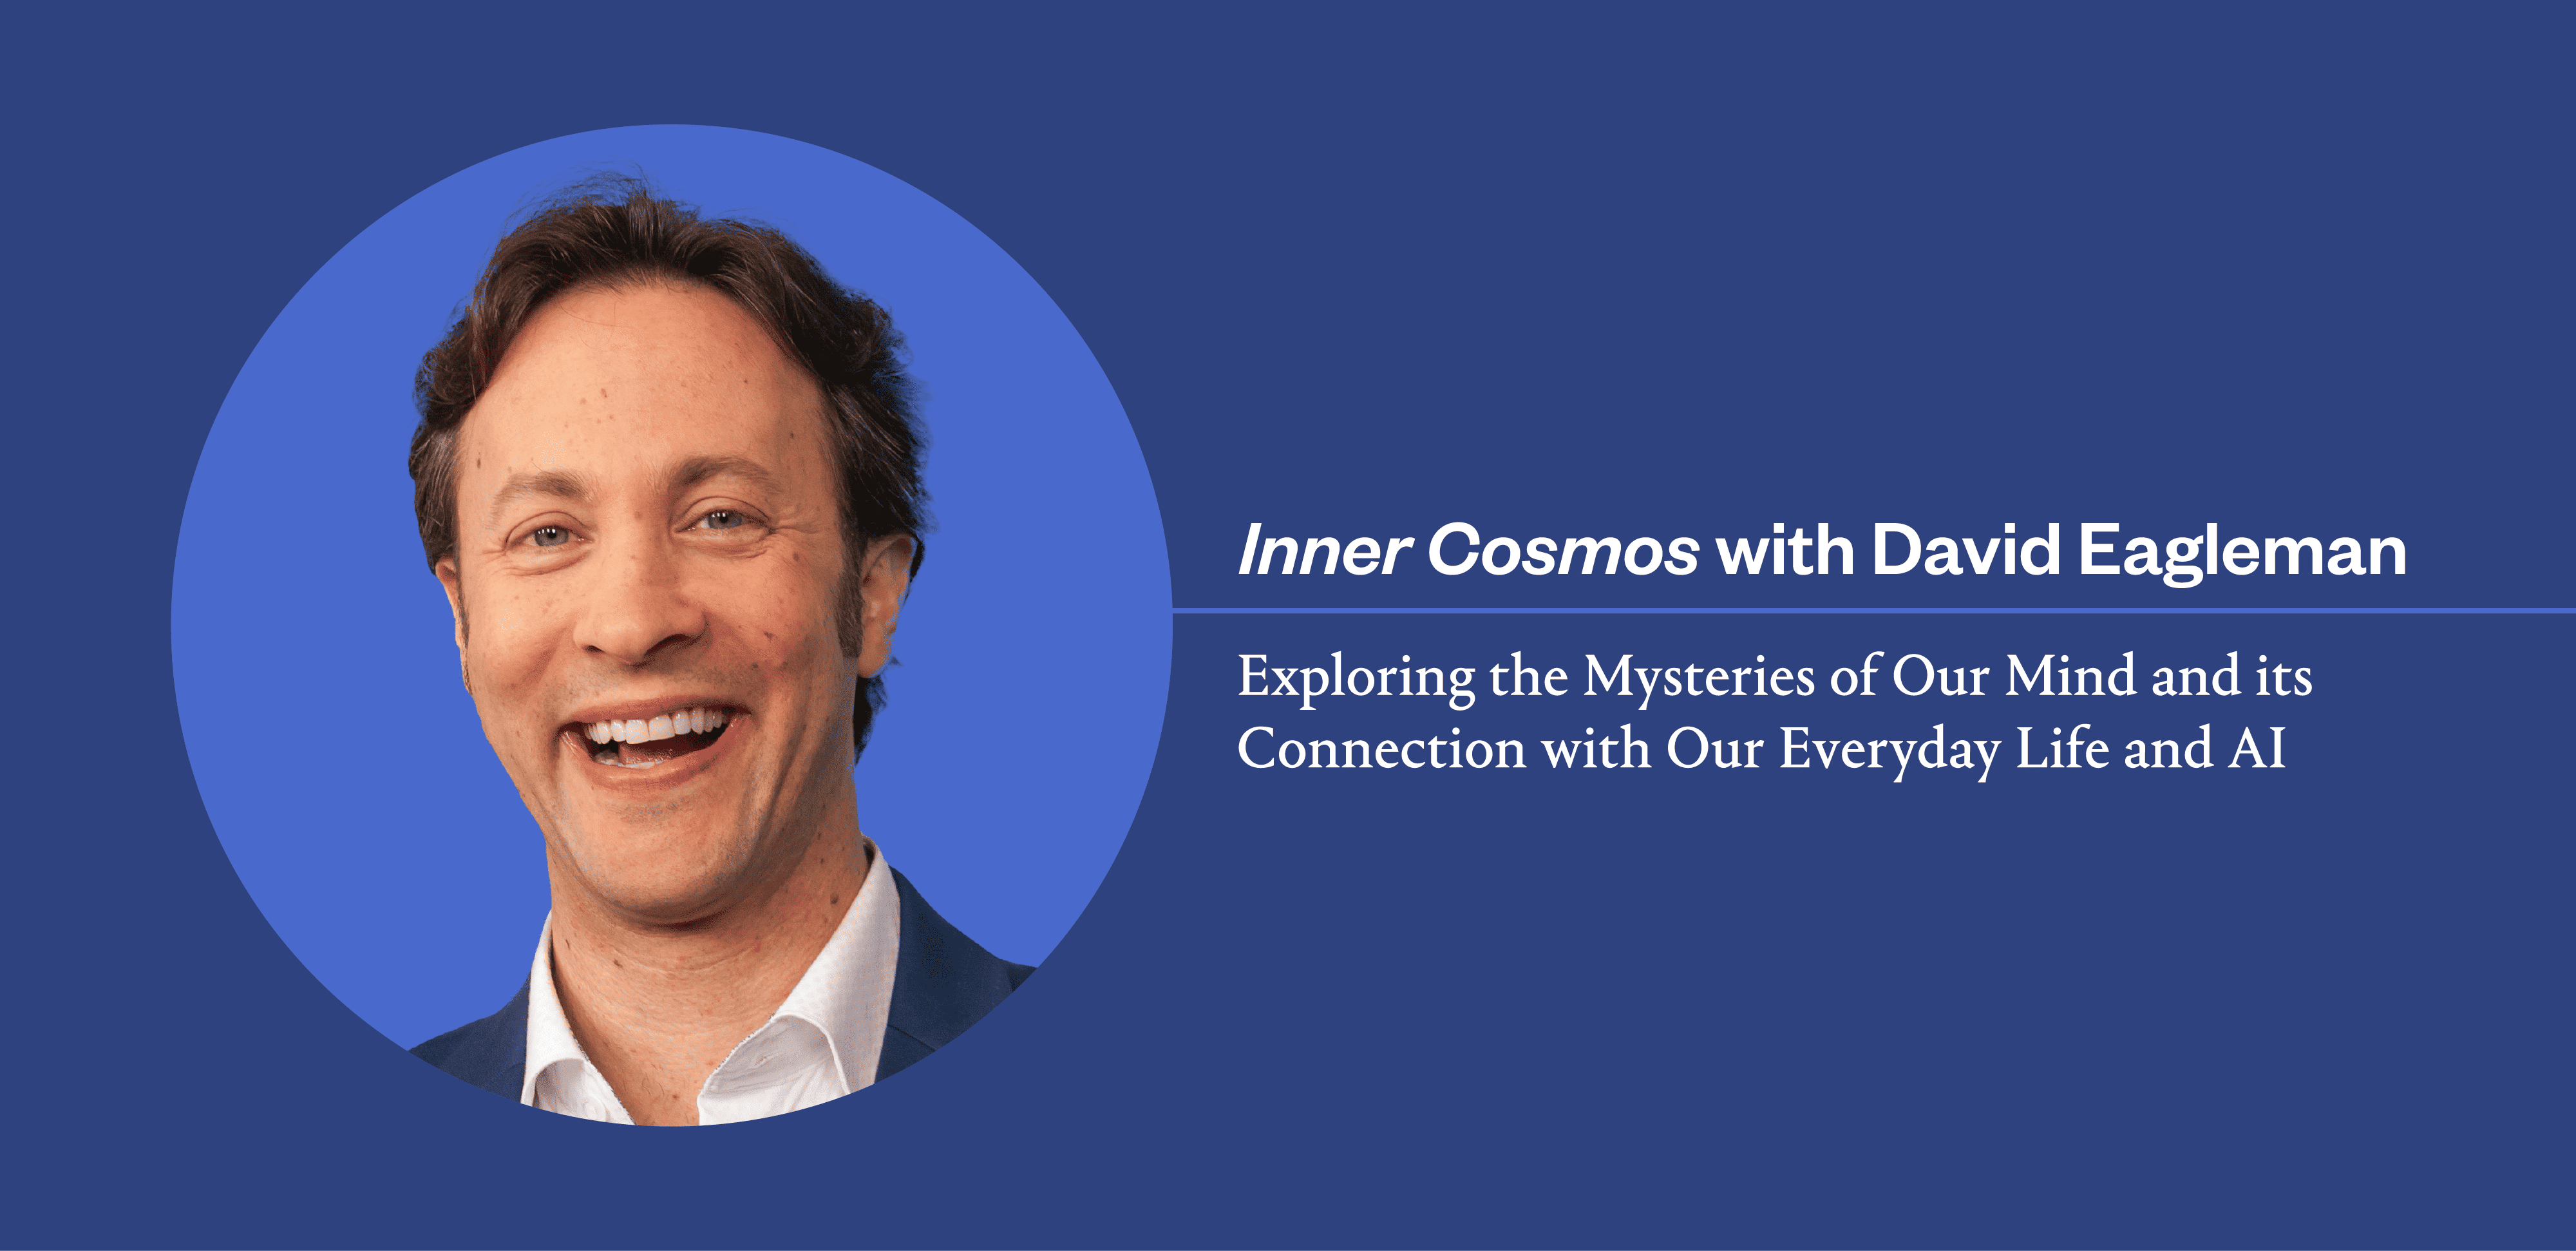 A Top-Ten Apple Podcast: The Brain, Our Daily Lives and AI on David Eagleman’s Inner Cosmos